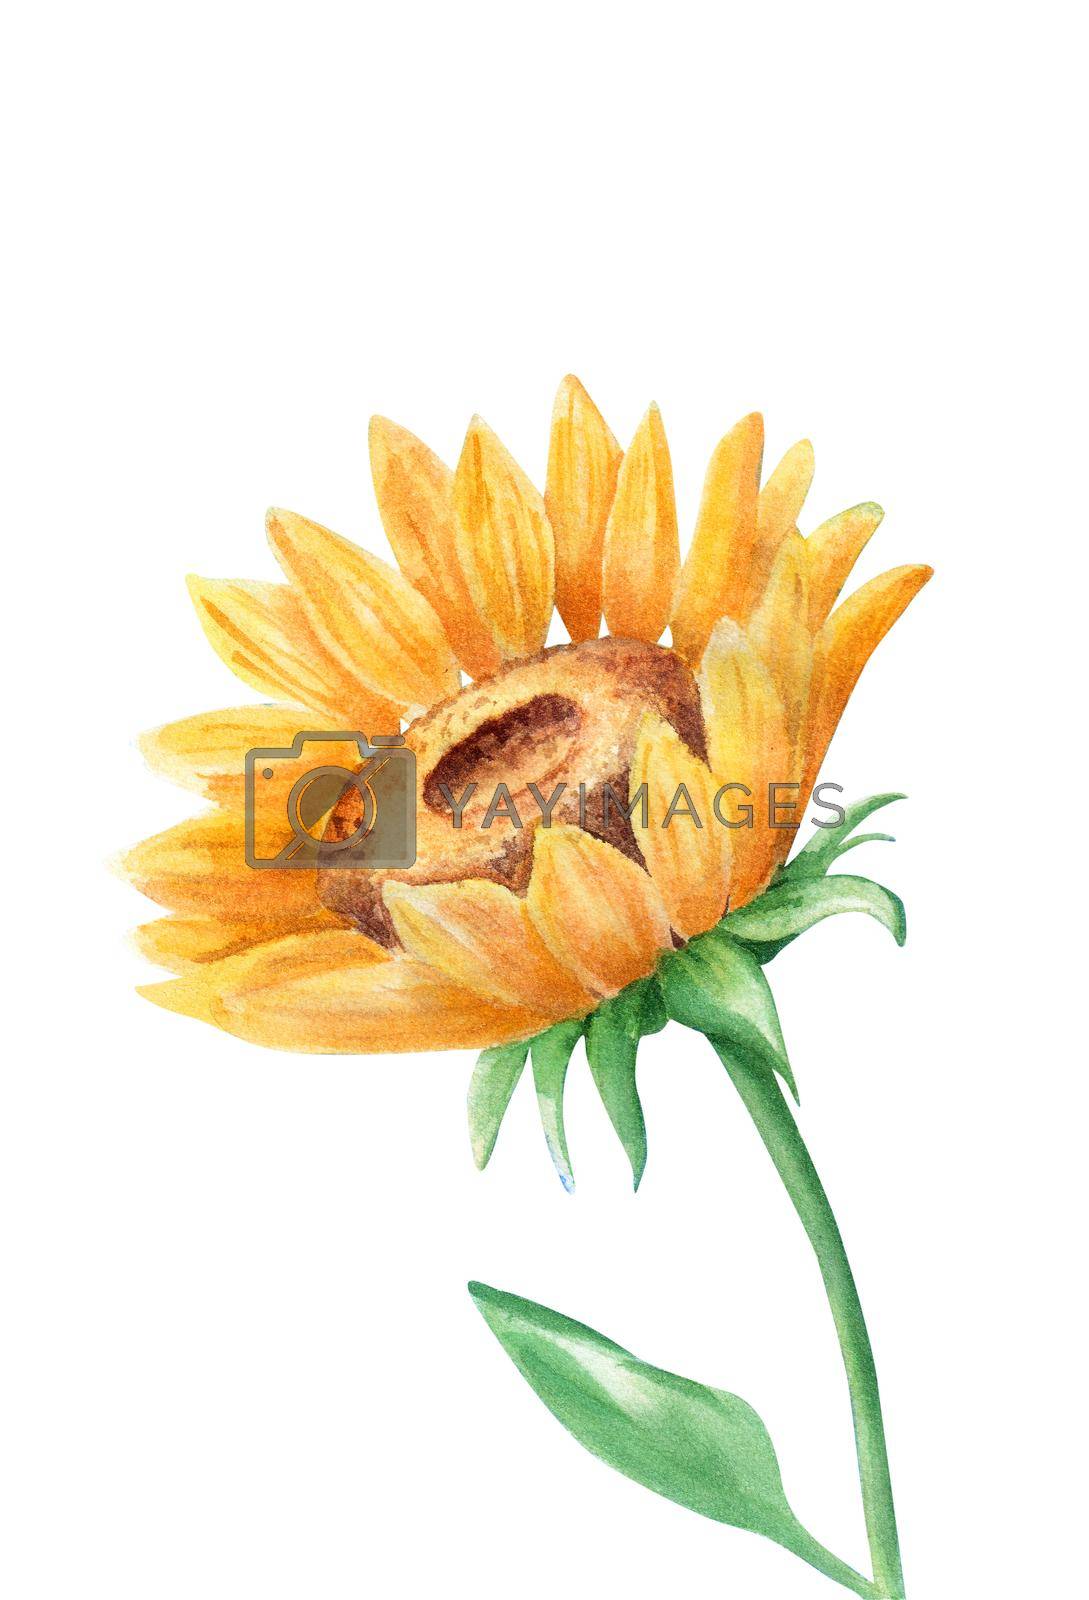 Royalty free image of Watercolor drawing of a bright sunflower isolated on a white background by Desperada